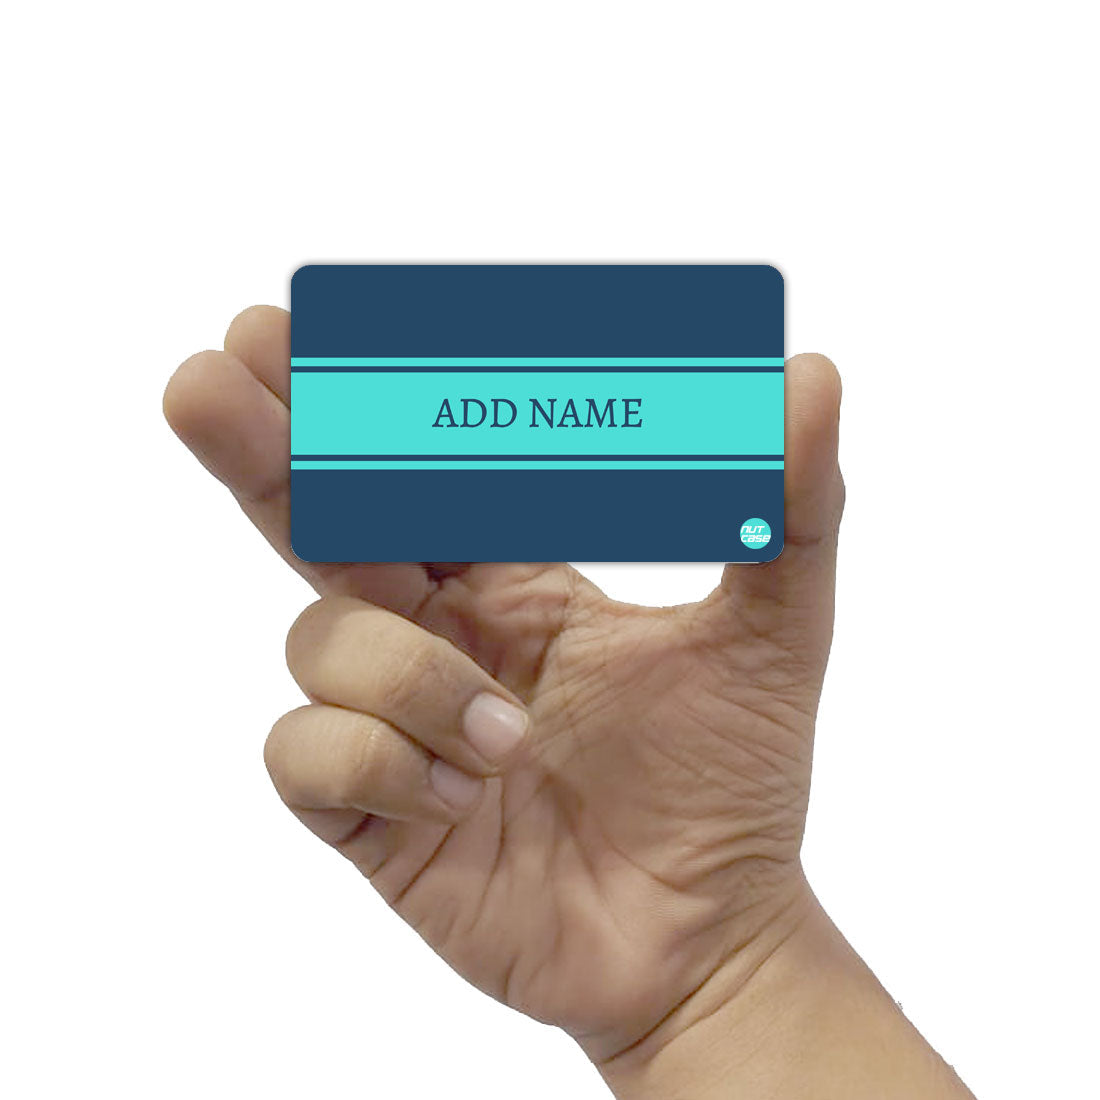 Create Customized Metal NFC Access Card Smart Card - Blue ( For Android Phones Only)